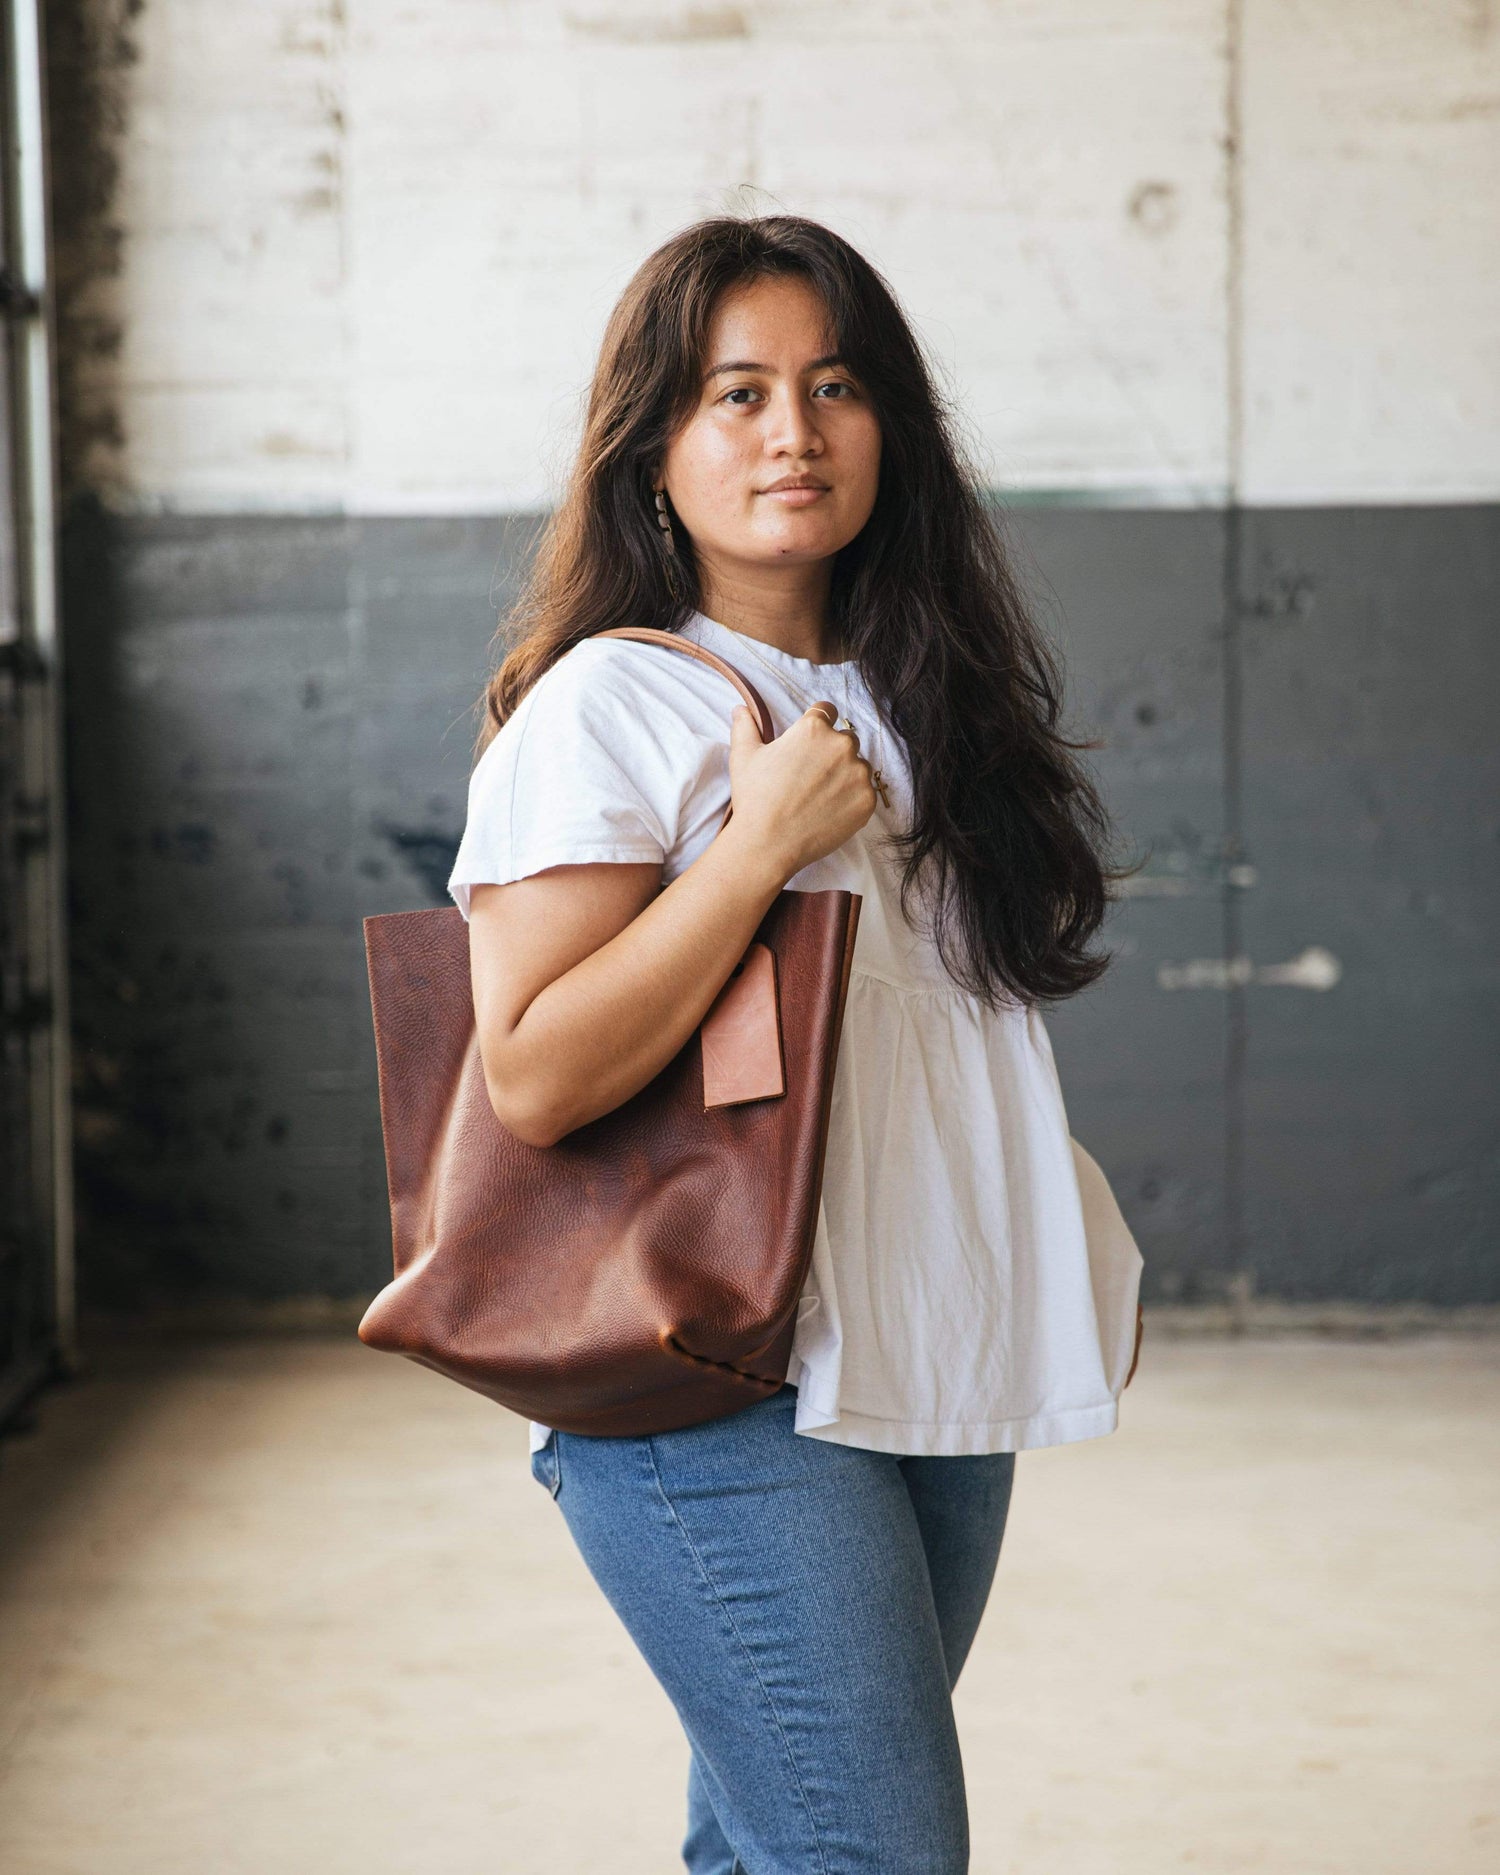 9 Denim Bags for Fall - Jean Backpacks, Bucket Bags, and Totes